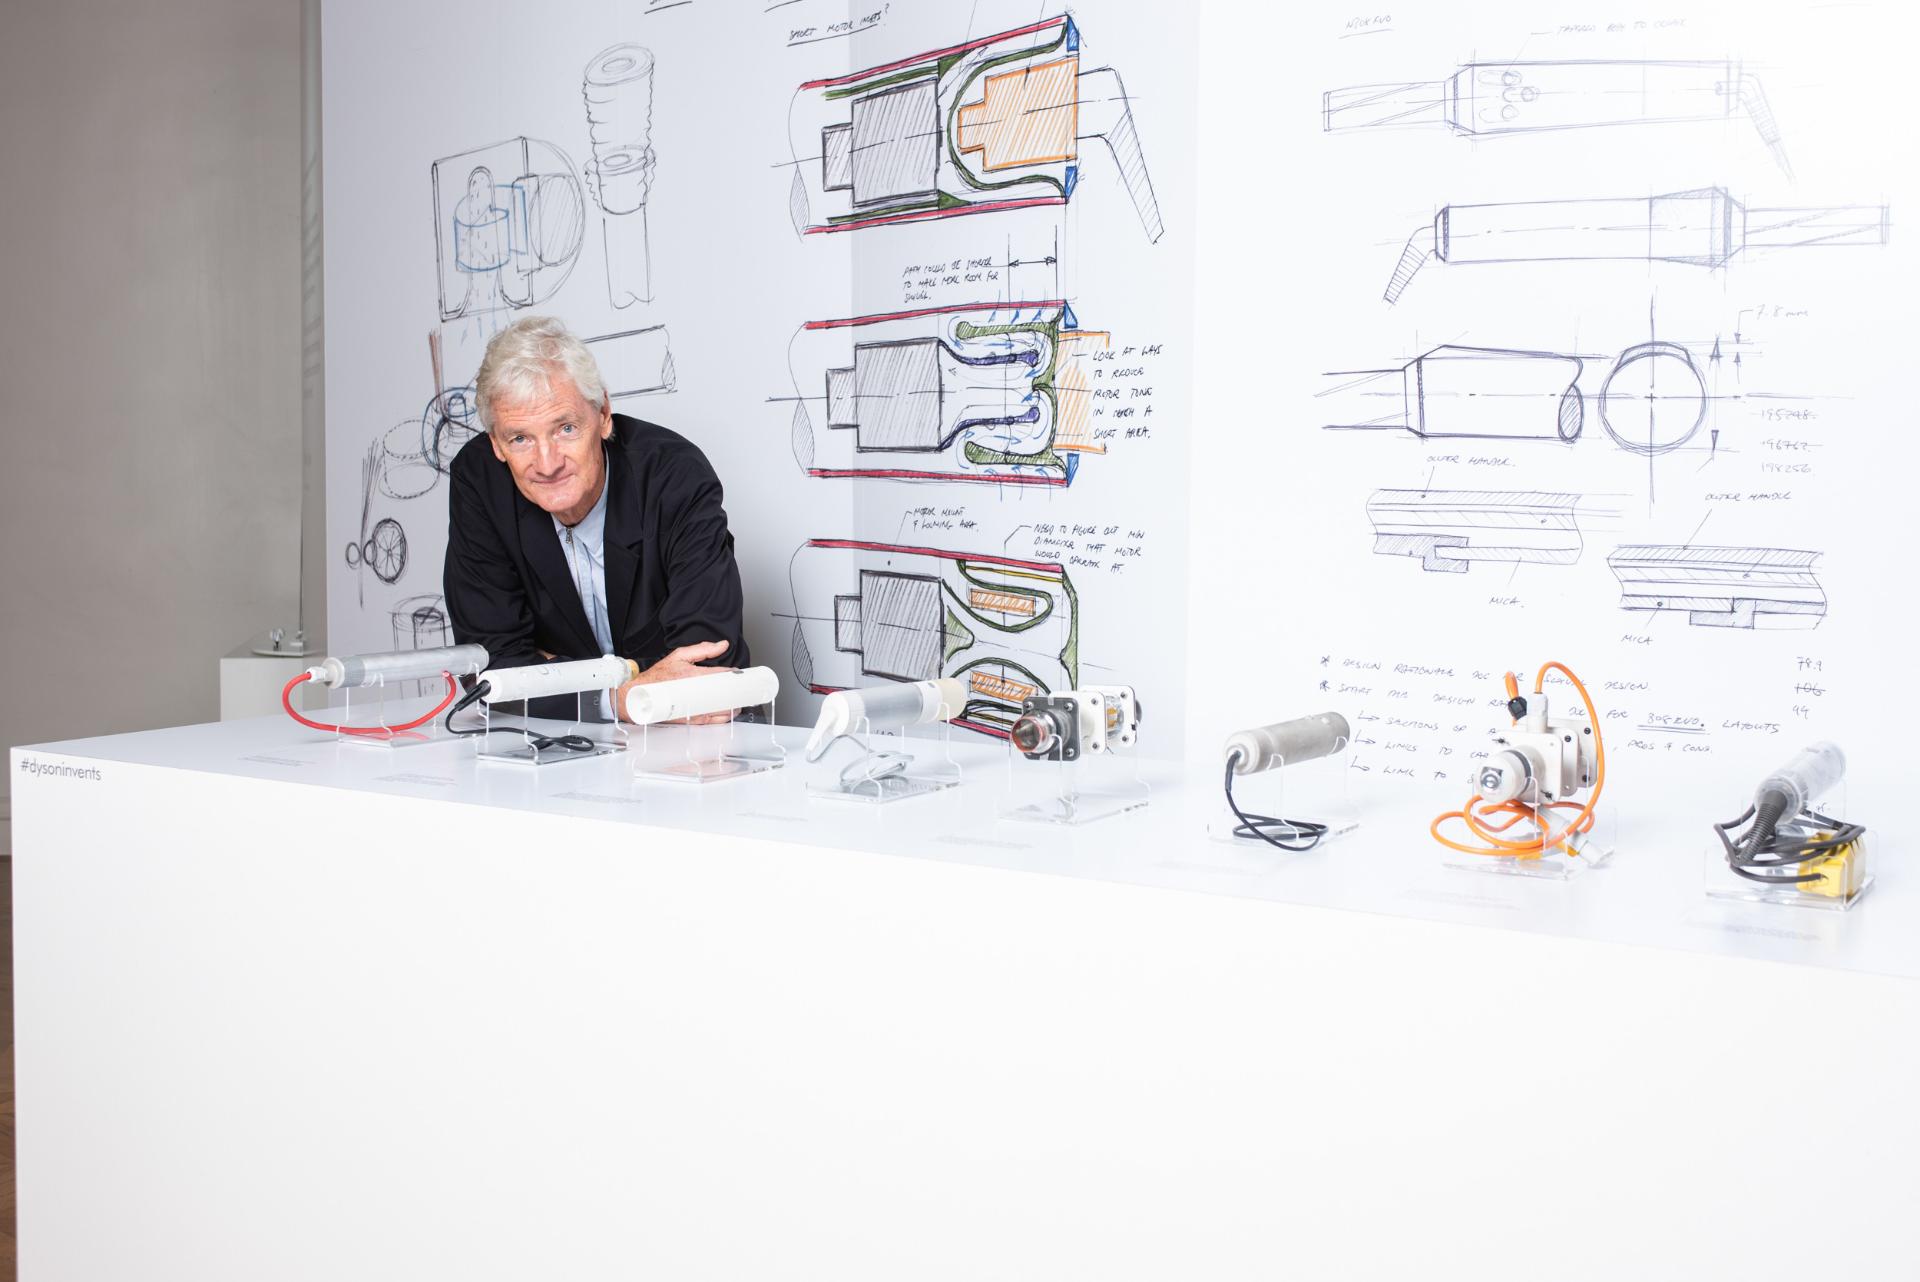 James Dyson with sketches of new Dyson airwrap